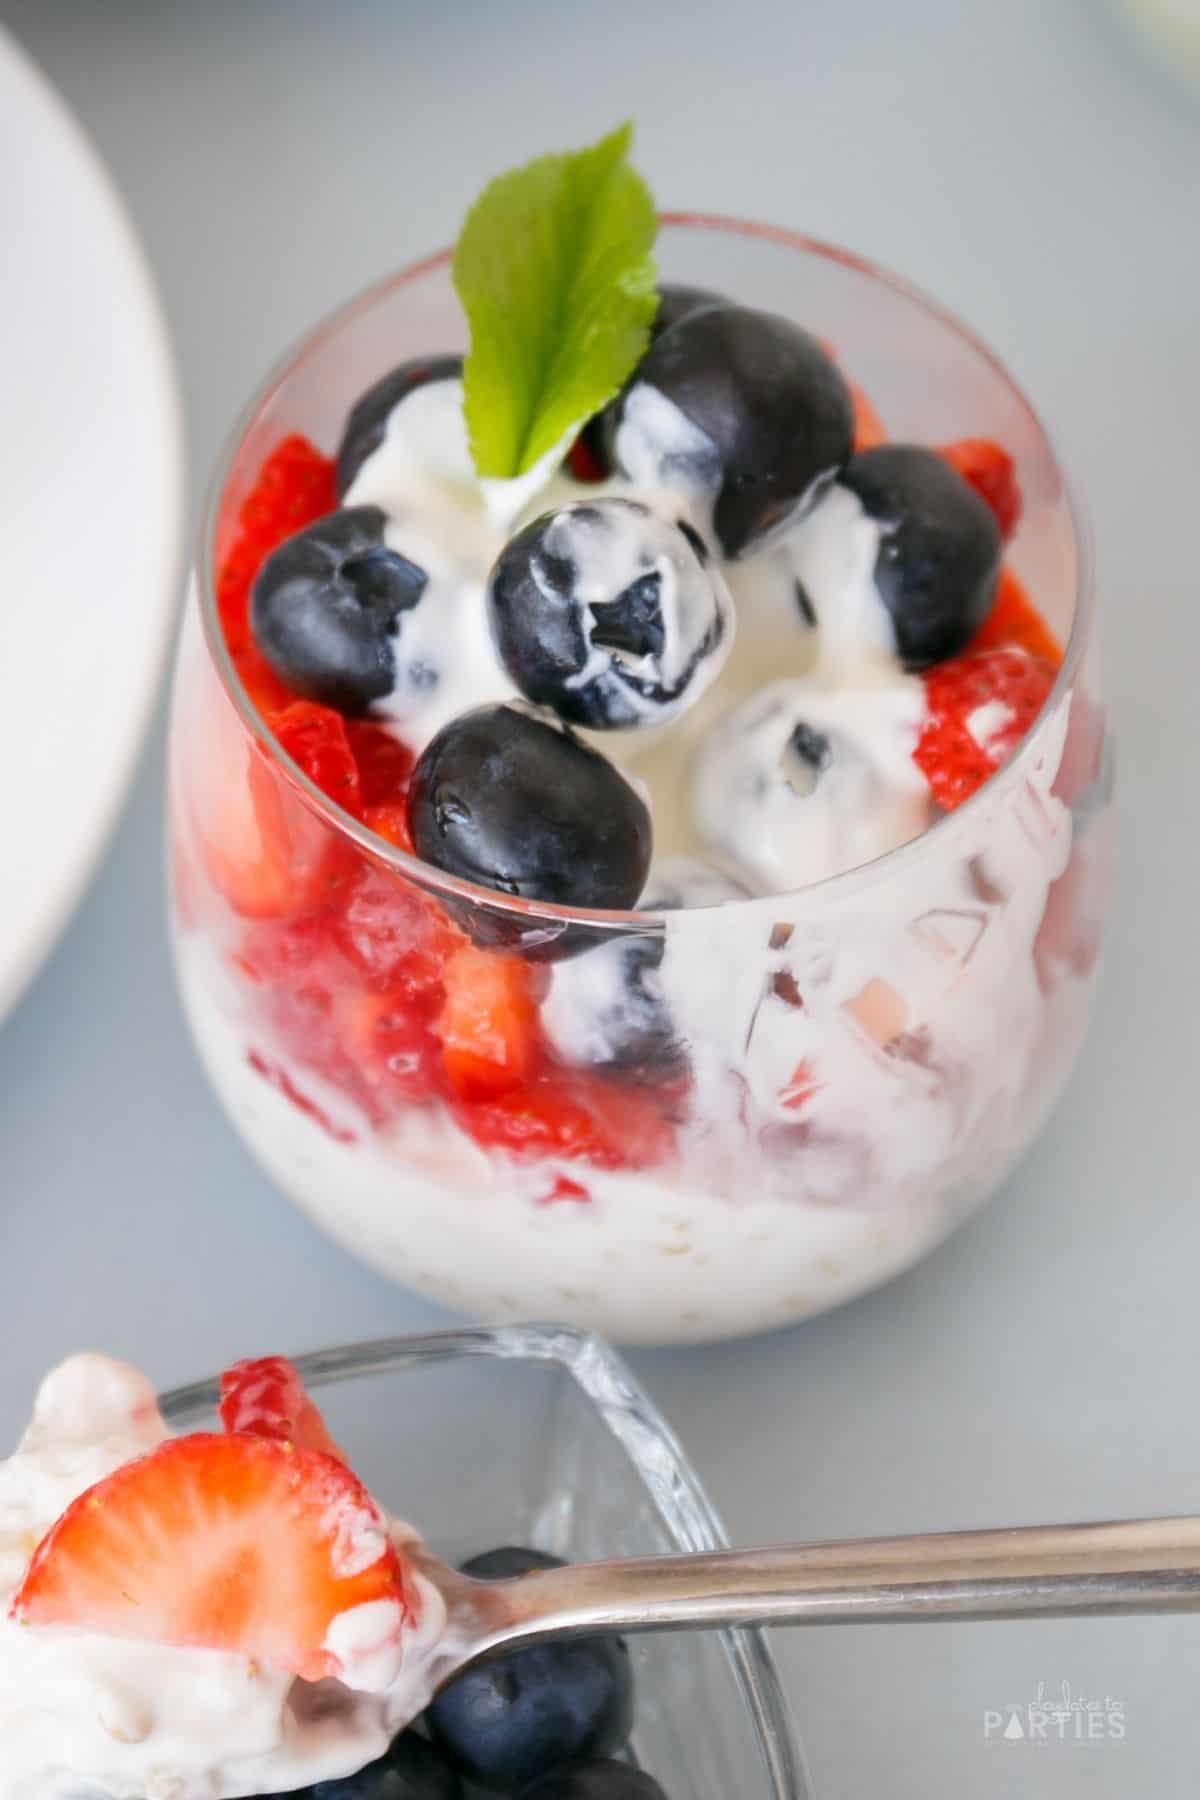 A cup with yogurt and berries with a bite taken out.